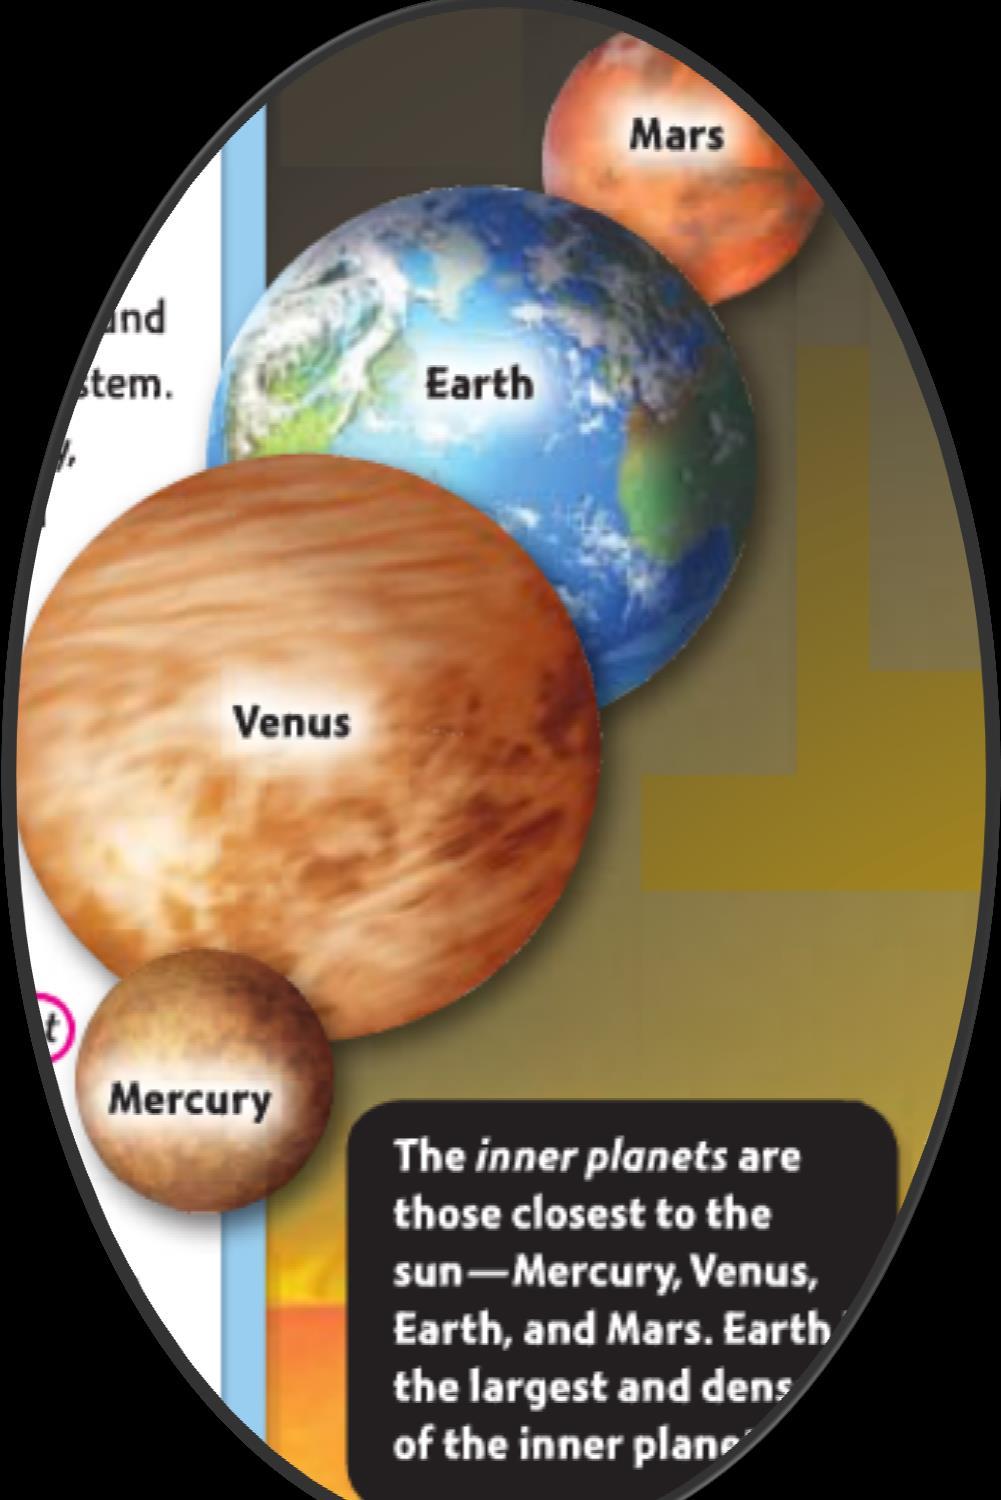 Earth is the largest and the densest of the inner planets.